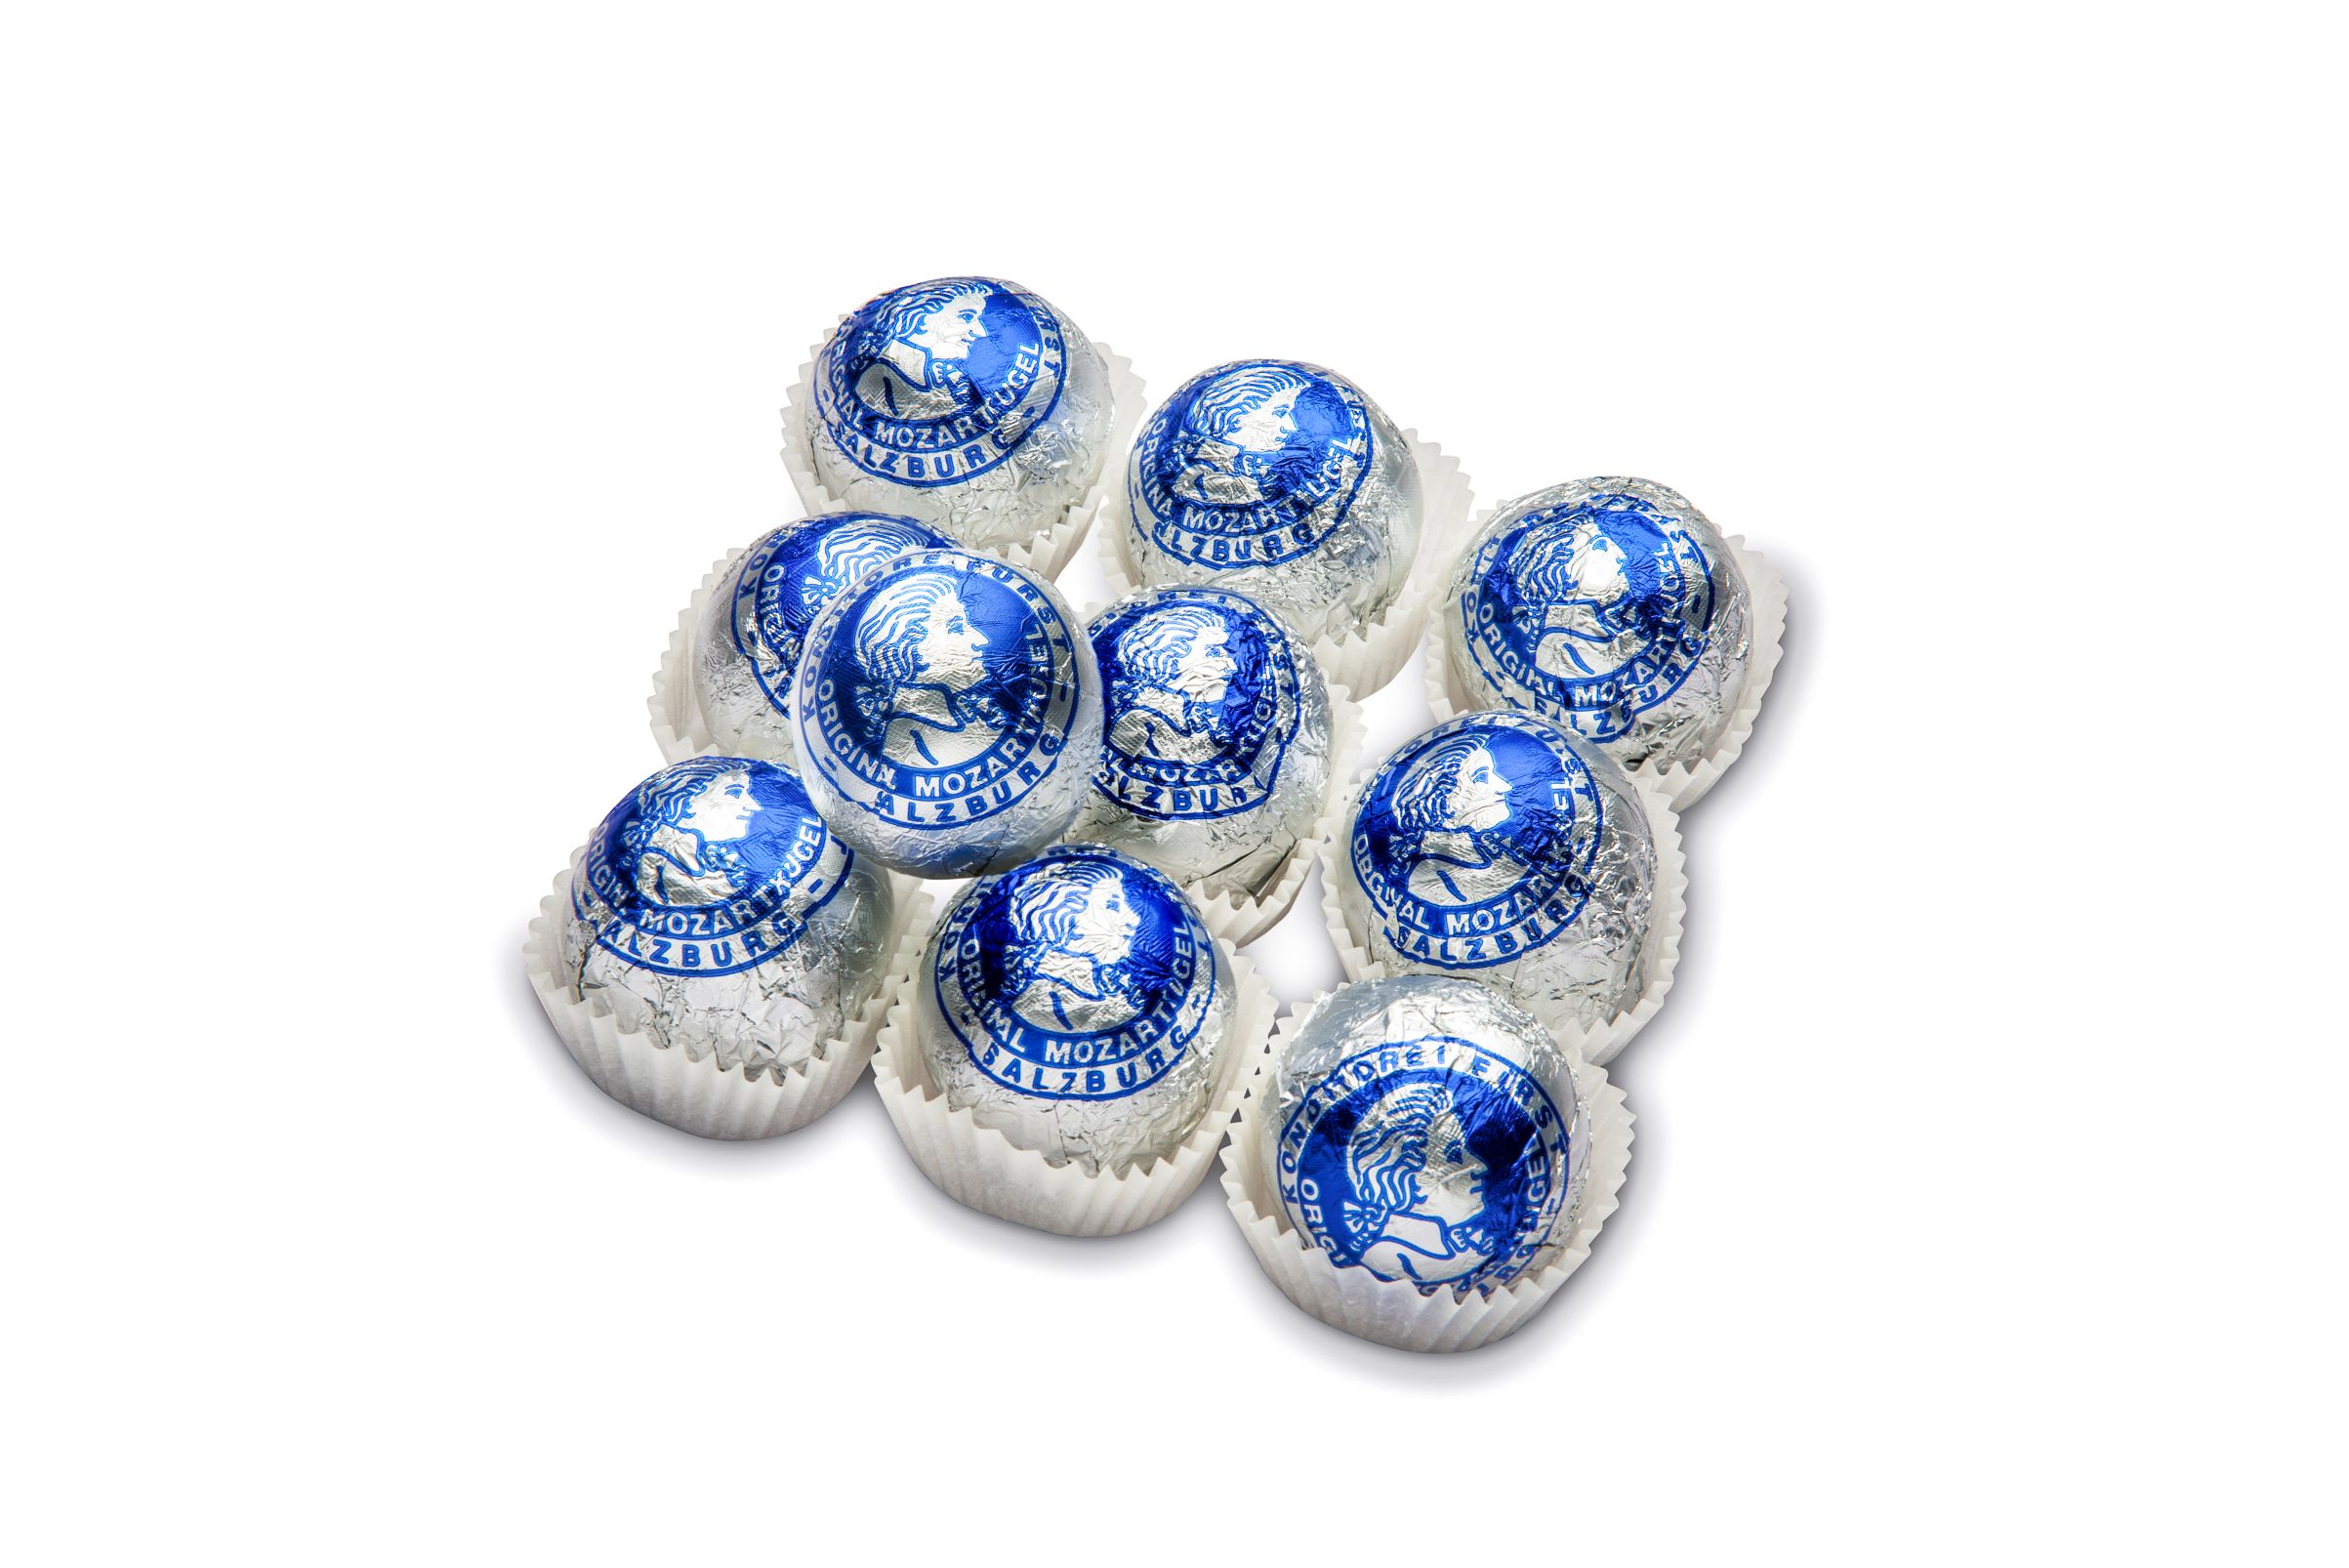 Mozart Balls Chocolate, 23 Pieces With Total 393 Grams, Mirabell Salzburg